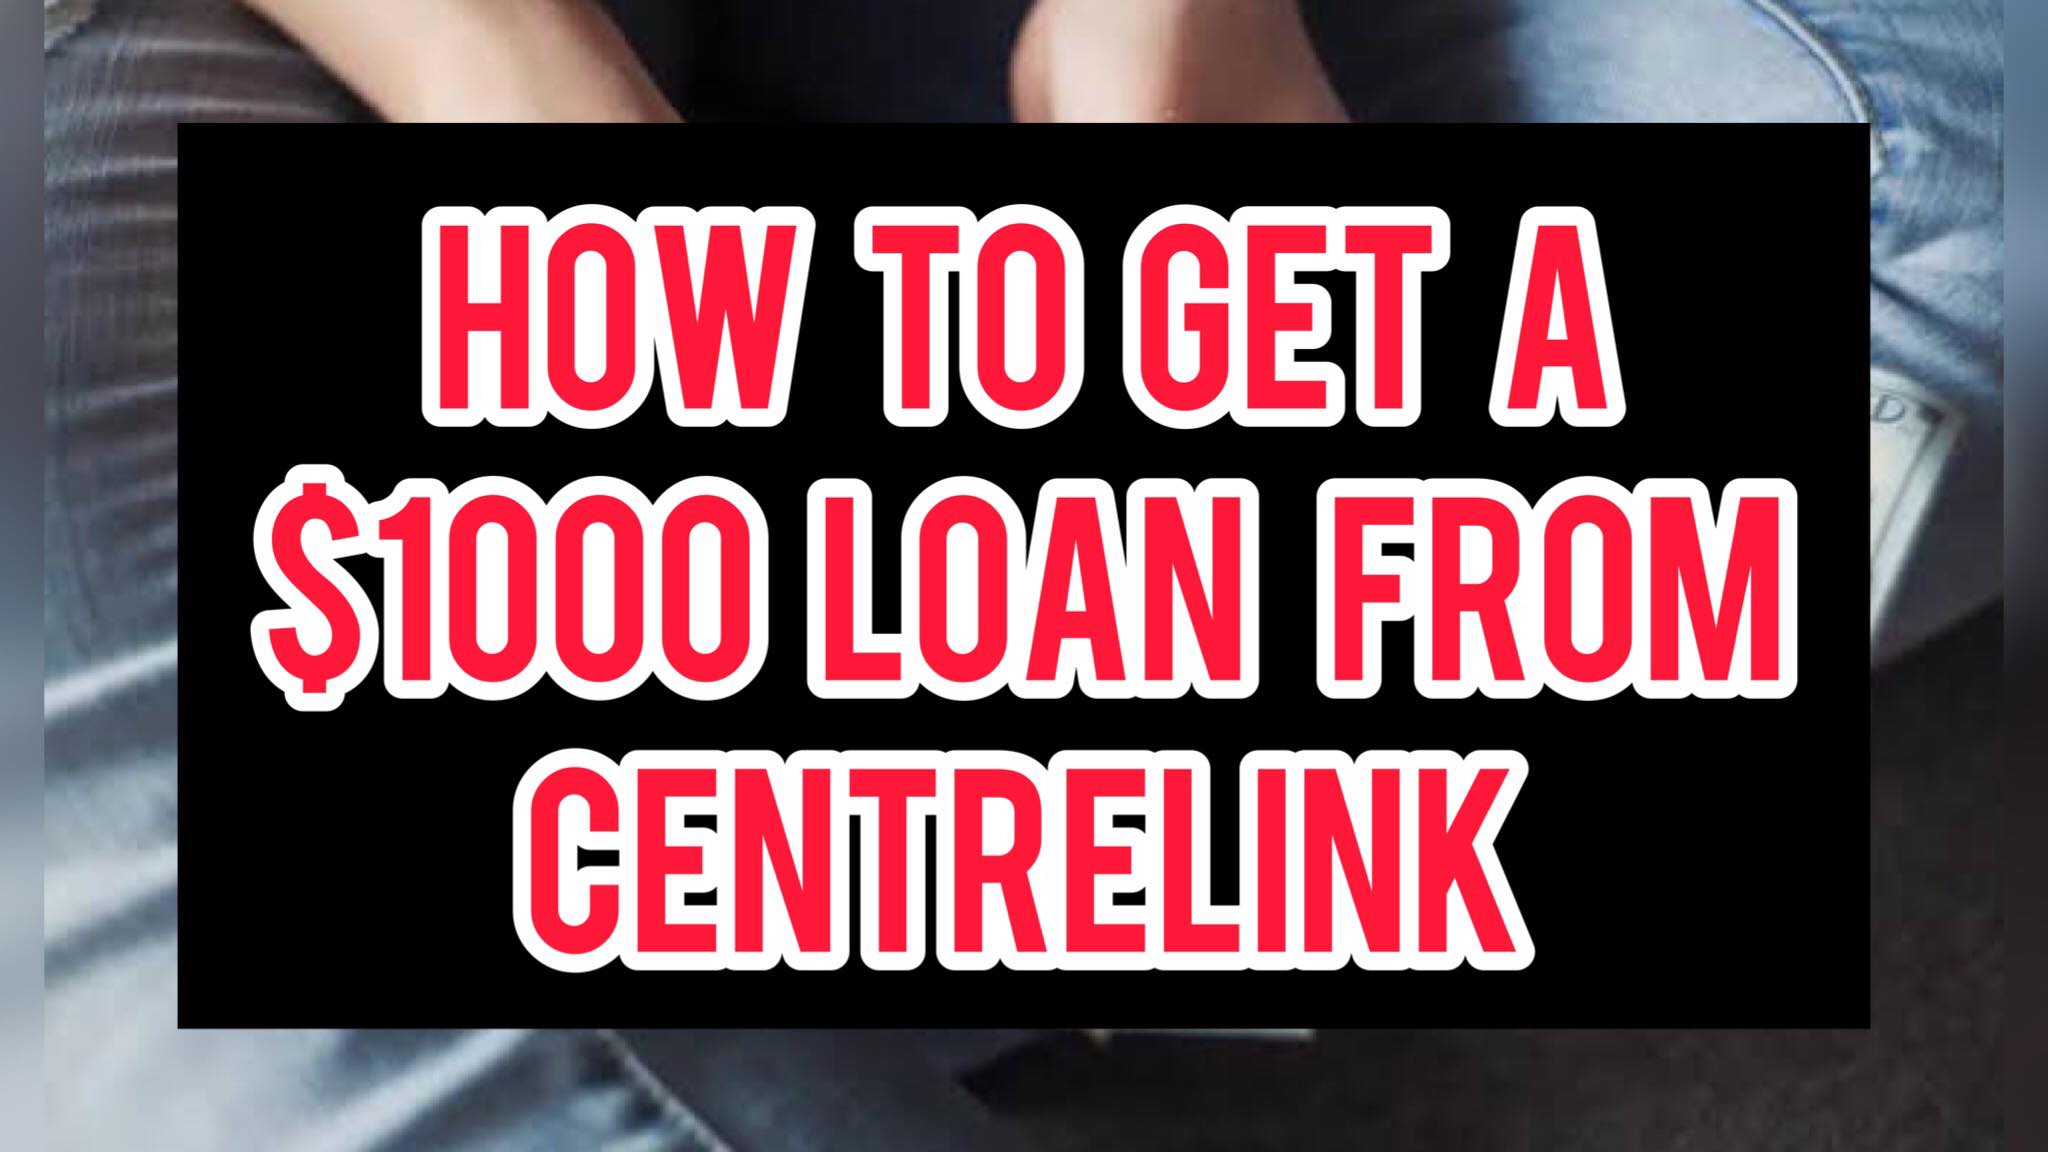 How Do I Get A $1000 Loan From Centrelink